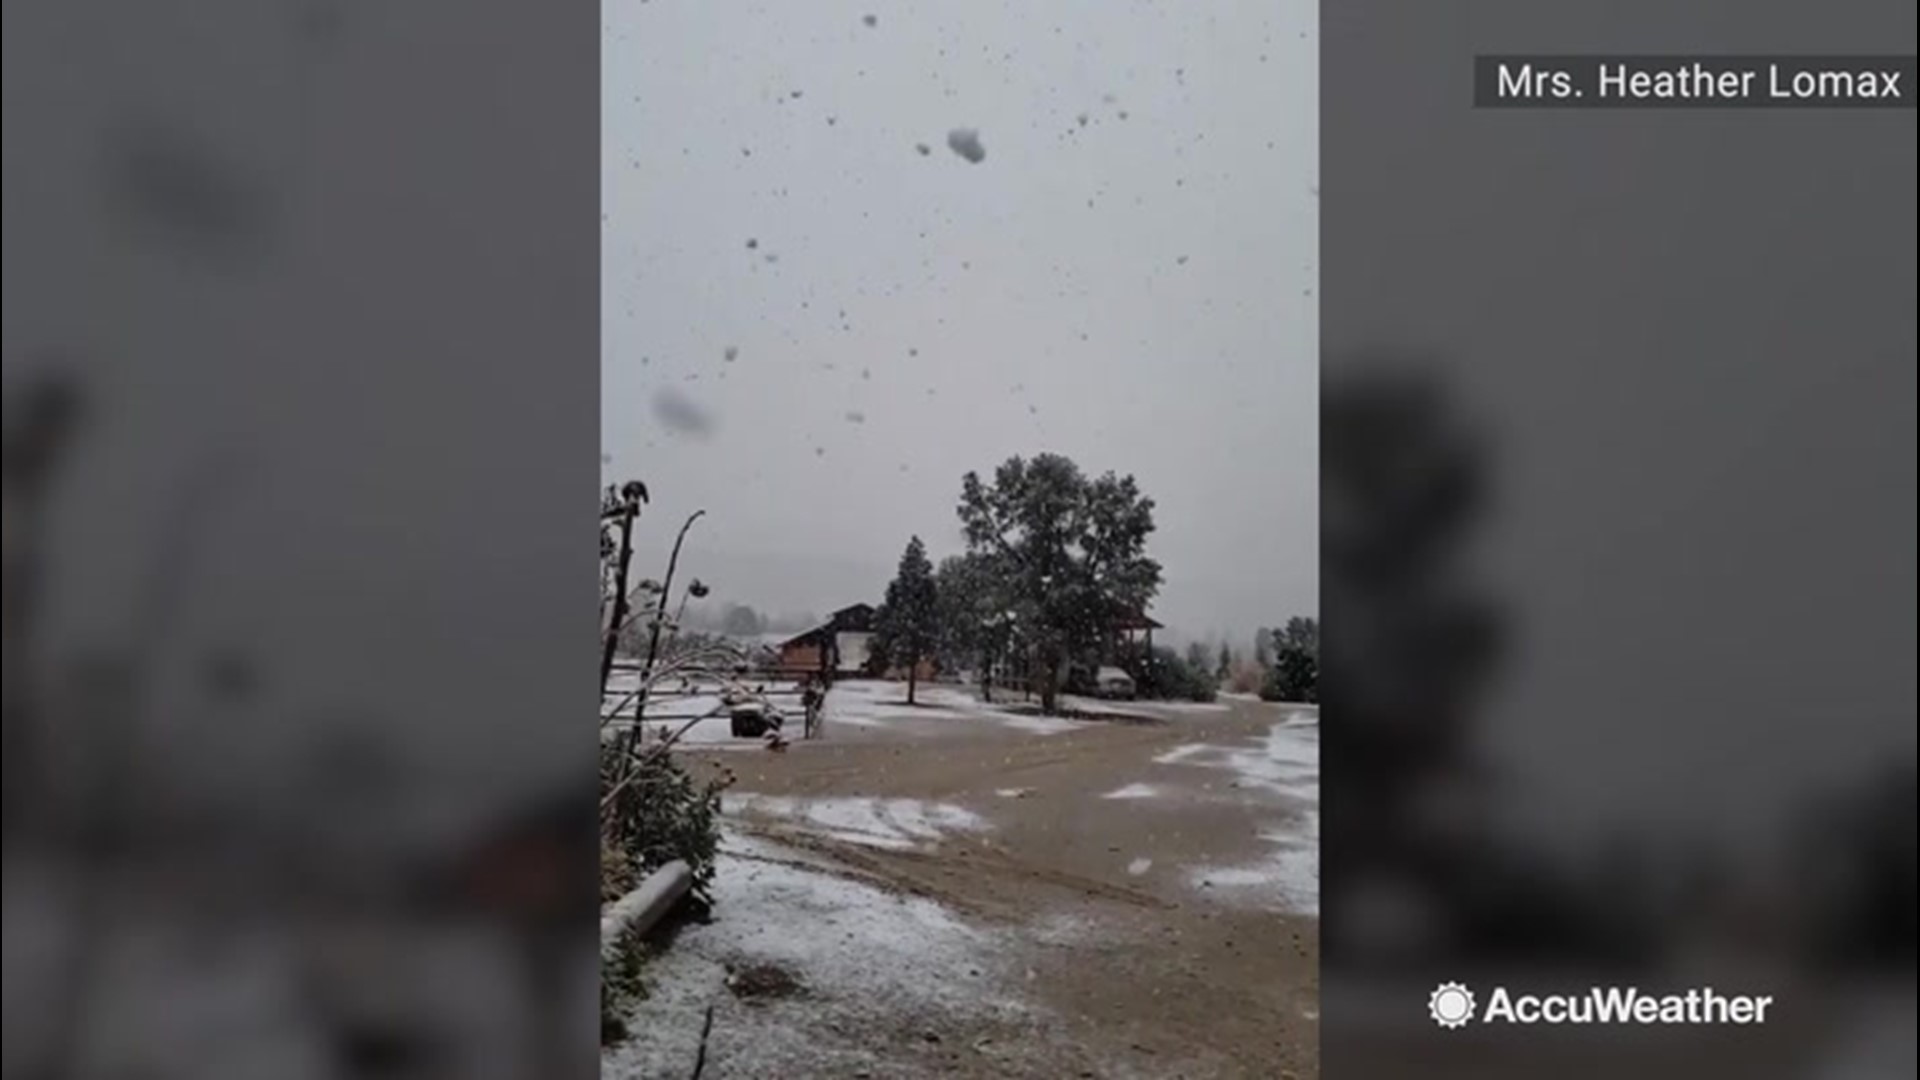 Gigantic snow flakes hit Lockwood Valley, California, on Nov. 20, covering the ground in snow.